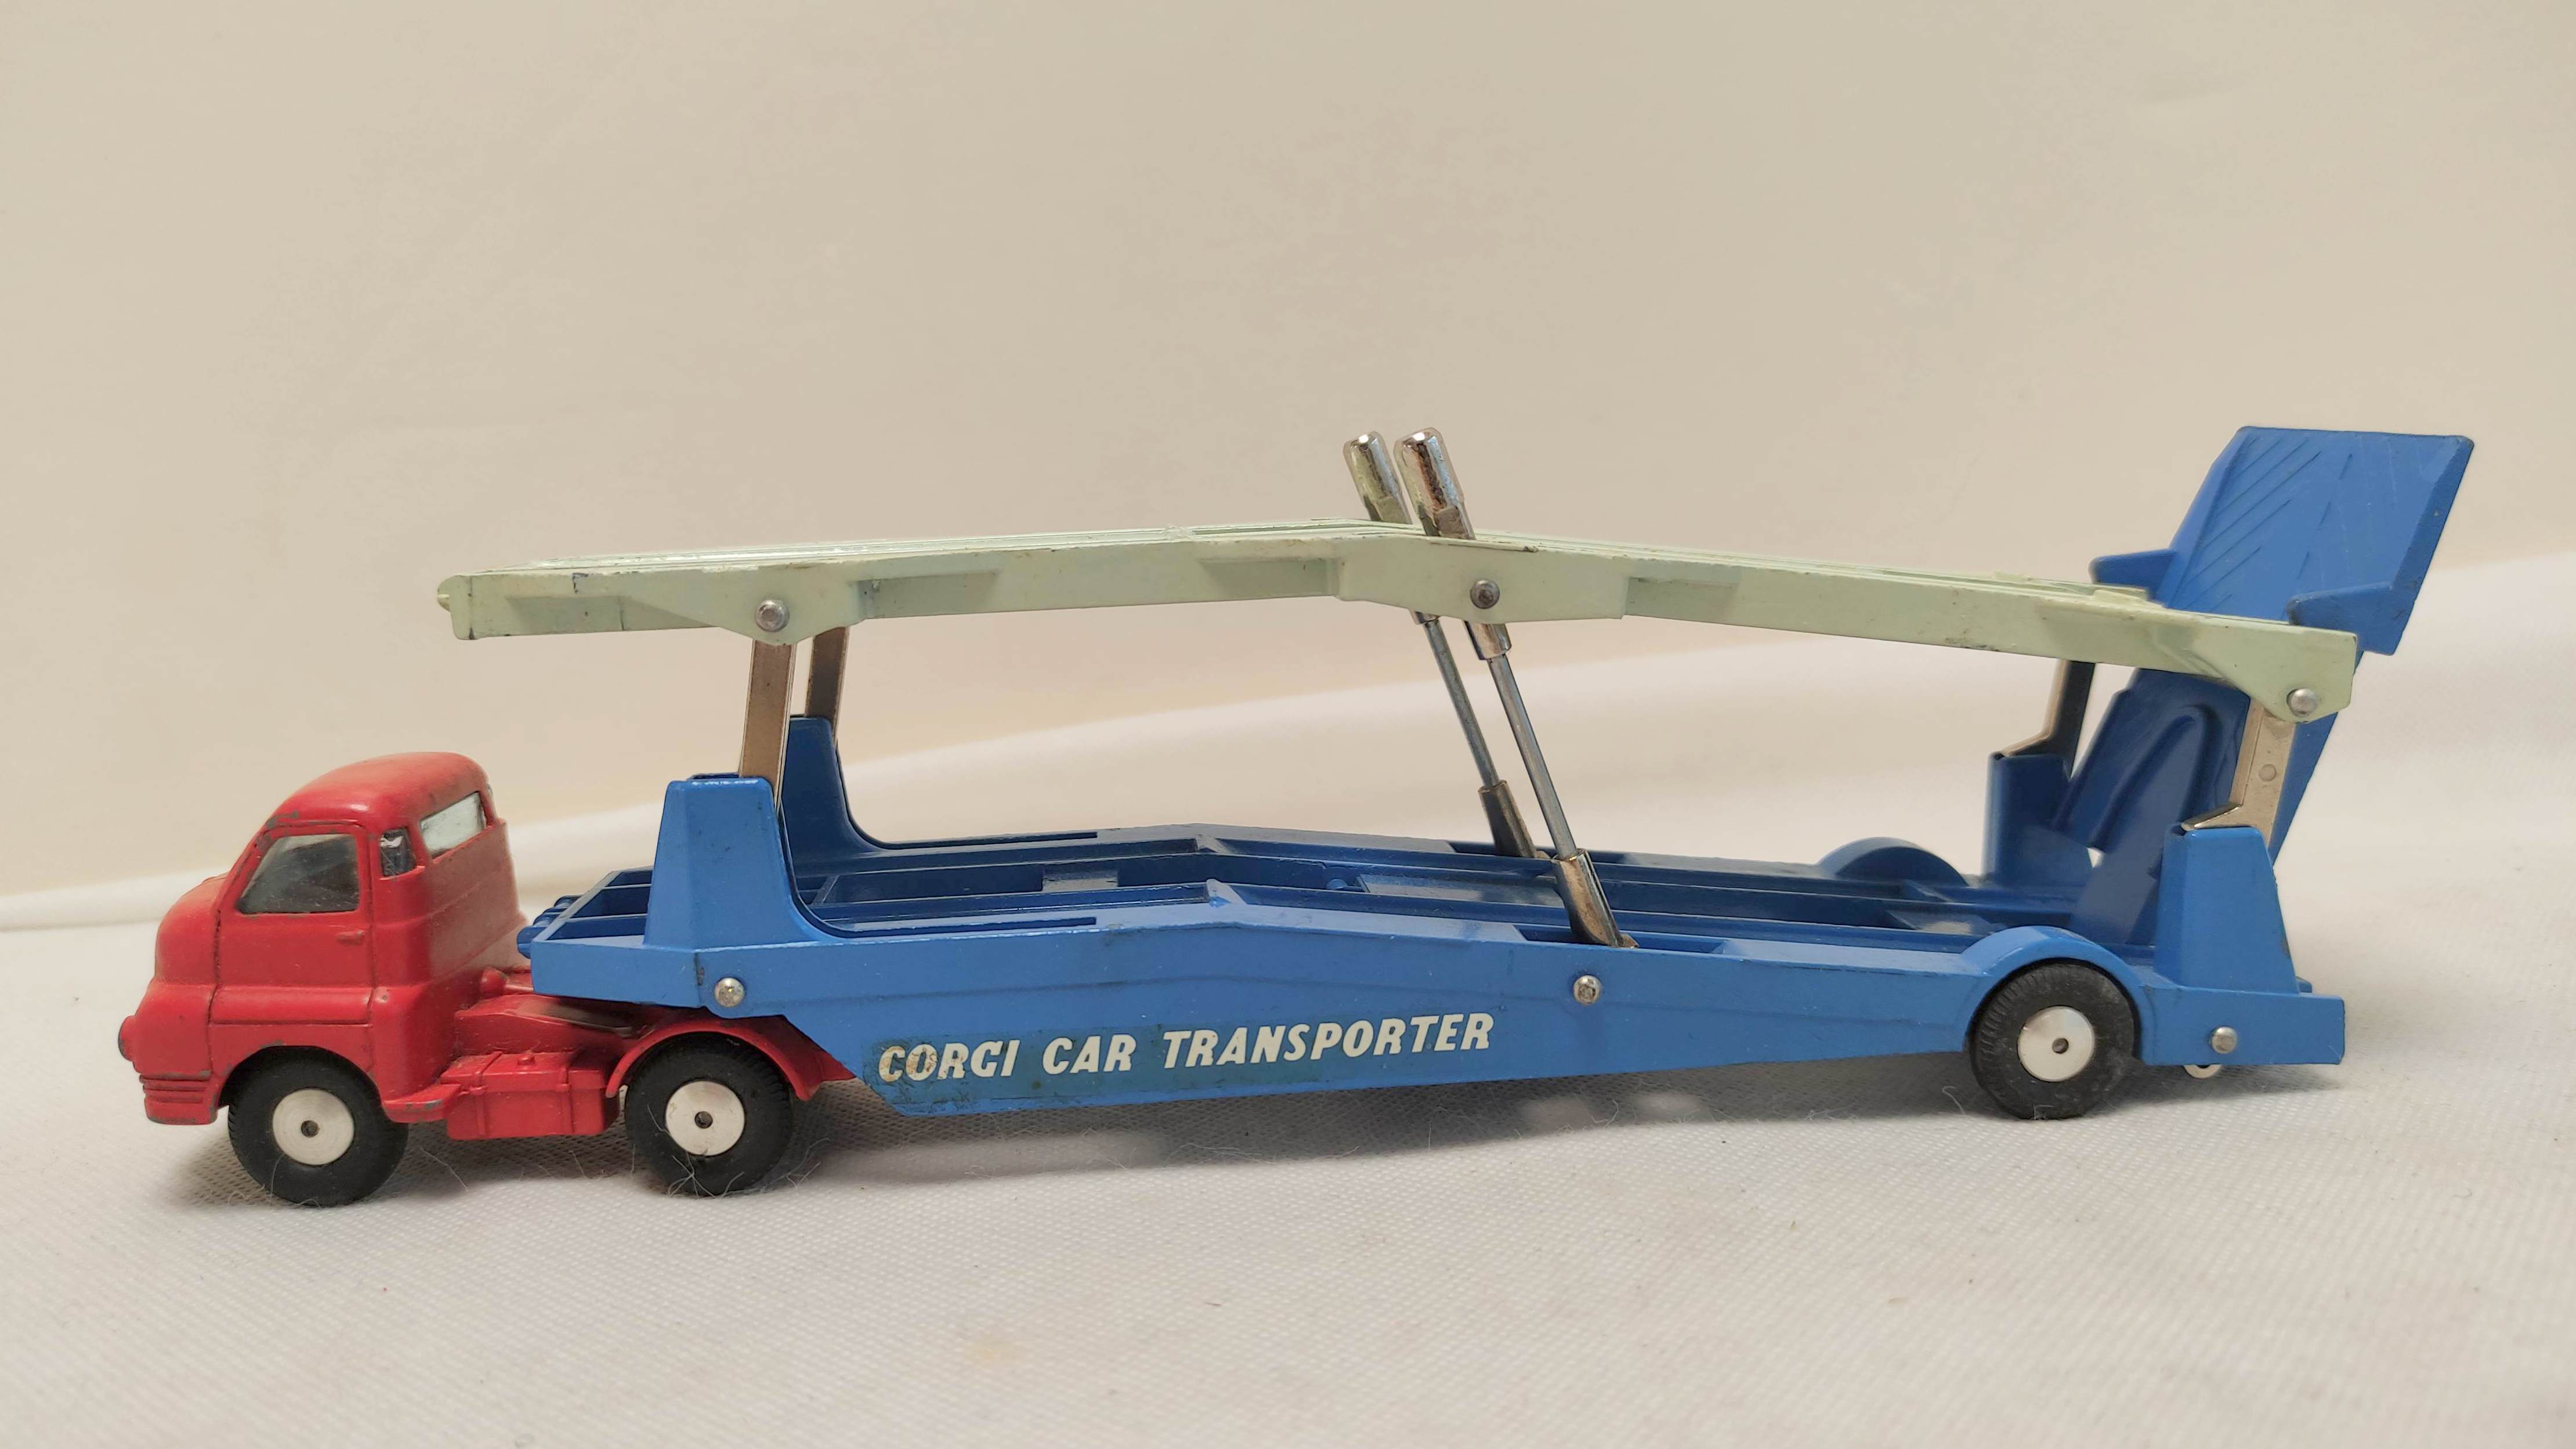 Corgi Major Toys Gift Set No.1 Carrimore Car Transporter with four Boxed Cars, consists of: Car - Image 5 of 12